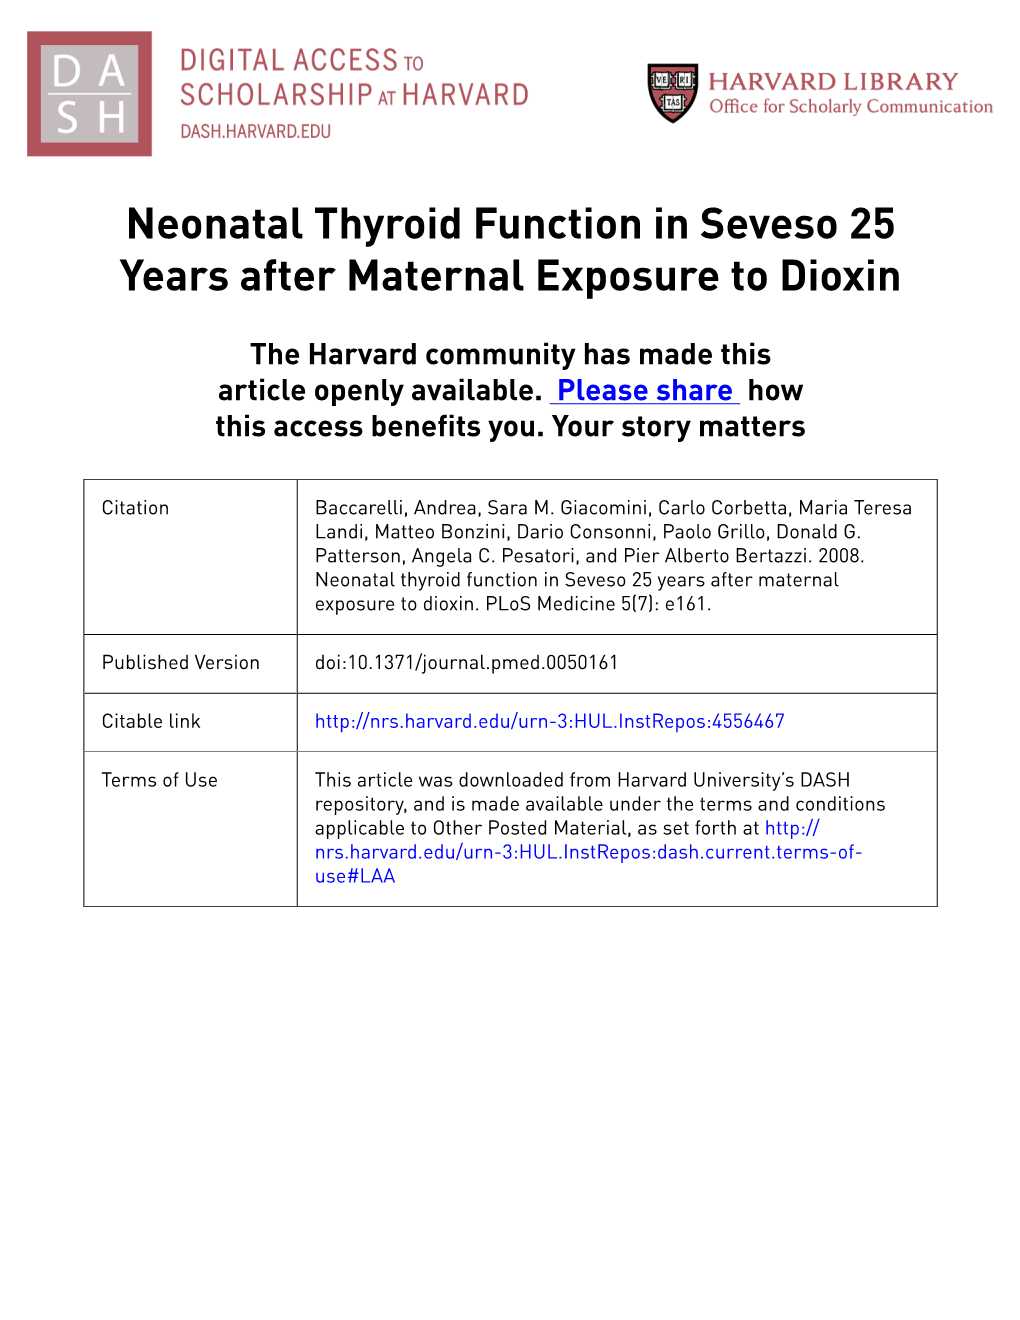 Neonatal Thyroid Function in Seveso 25 Years After Maternal Exposure to Dioxin